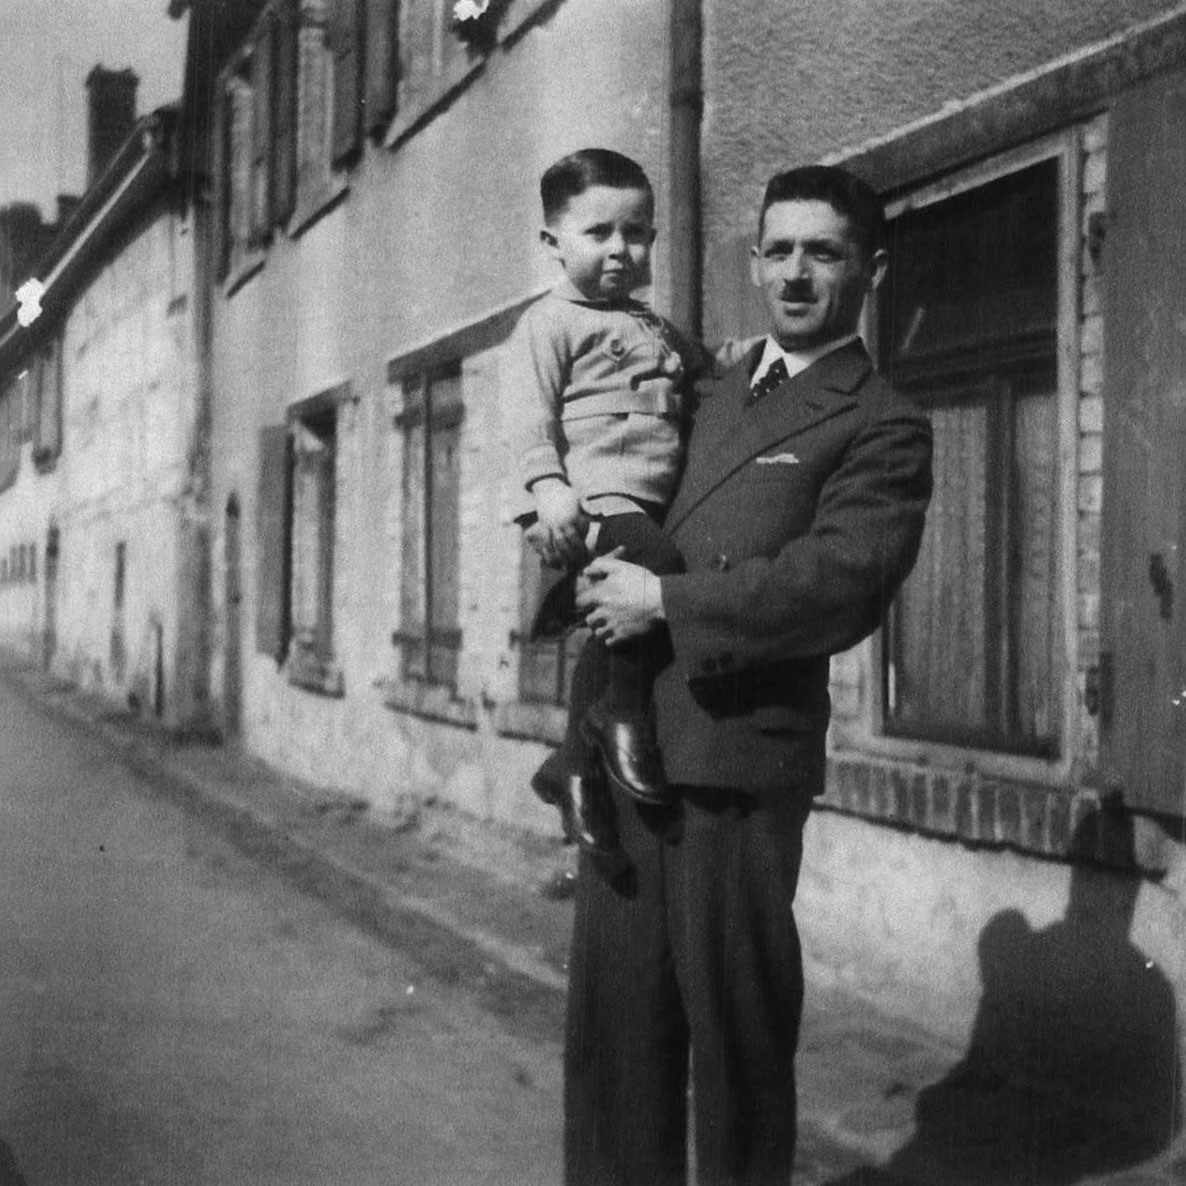 Ehud Loeb with his father Hugo in Buehl, Germany before the war. The family home is in the background